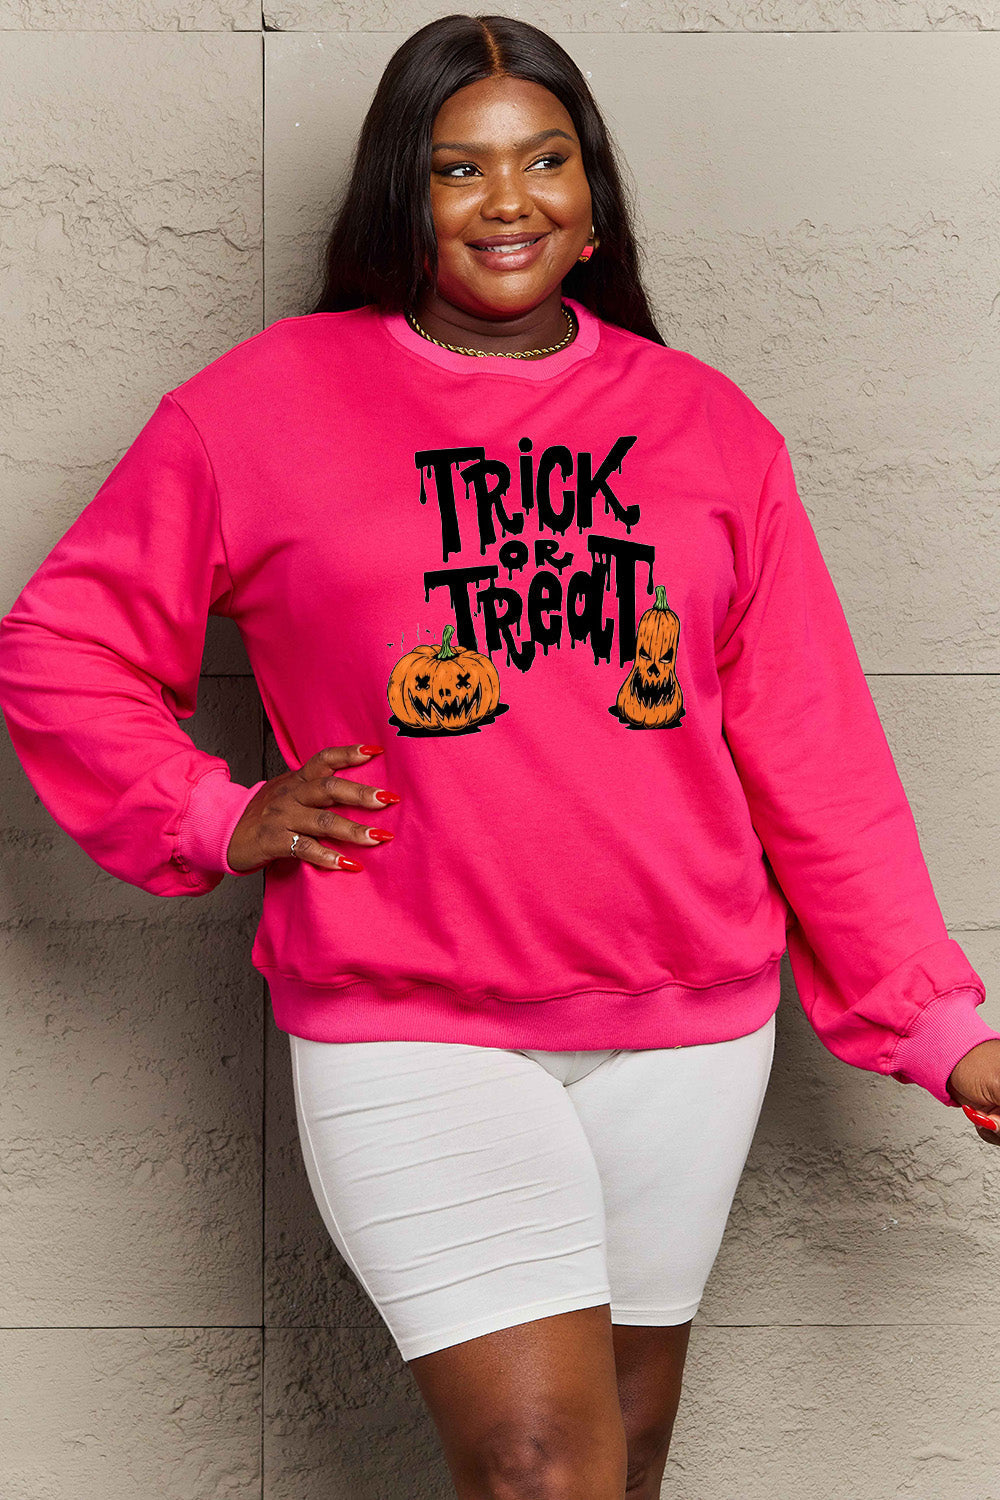 Full Size TRICK OR TREAT Graphic Sweatshirt - Pink / S - T-Shirts - Shirts & Tops - 17 - 2024